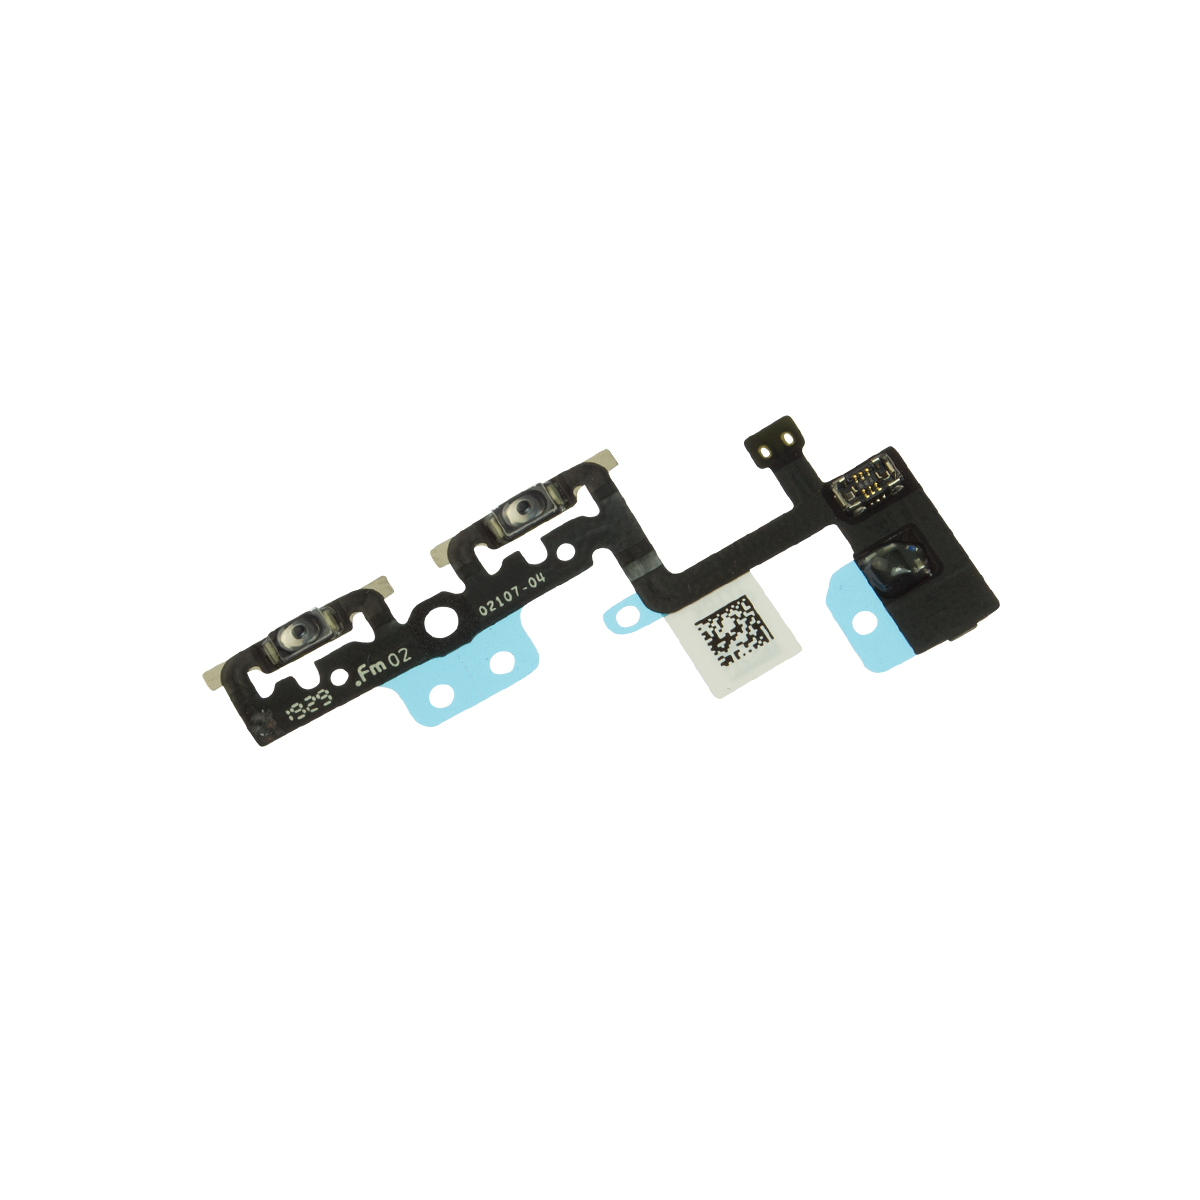 iPhone 11 Pro Max Mute Switch and Volume Switch Flex Cable Replacement